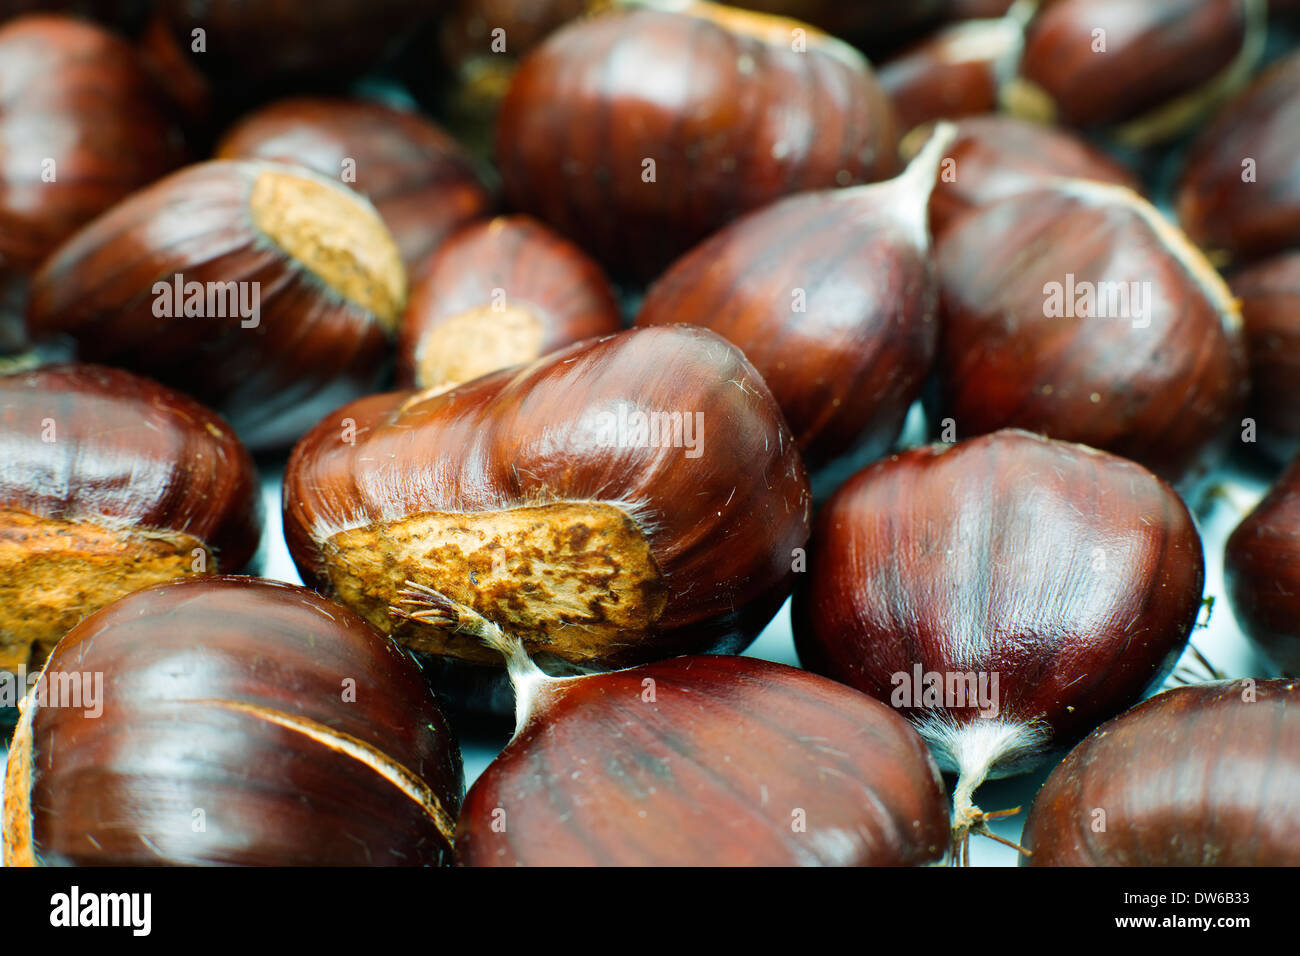 Sweet chestnuts Stock Photo